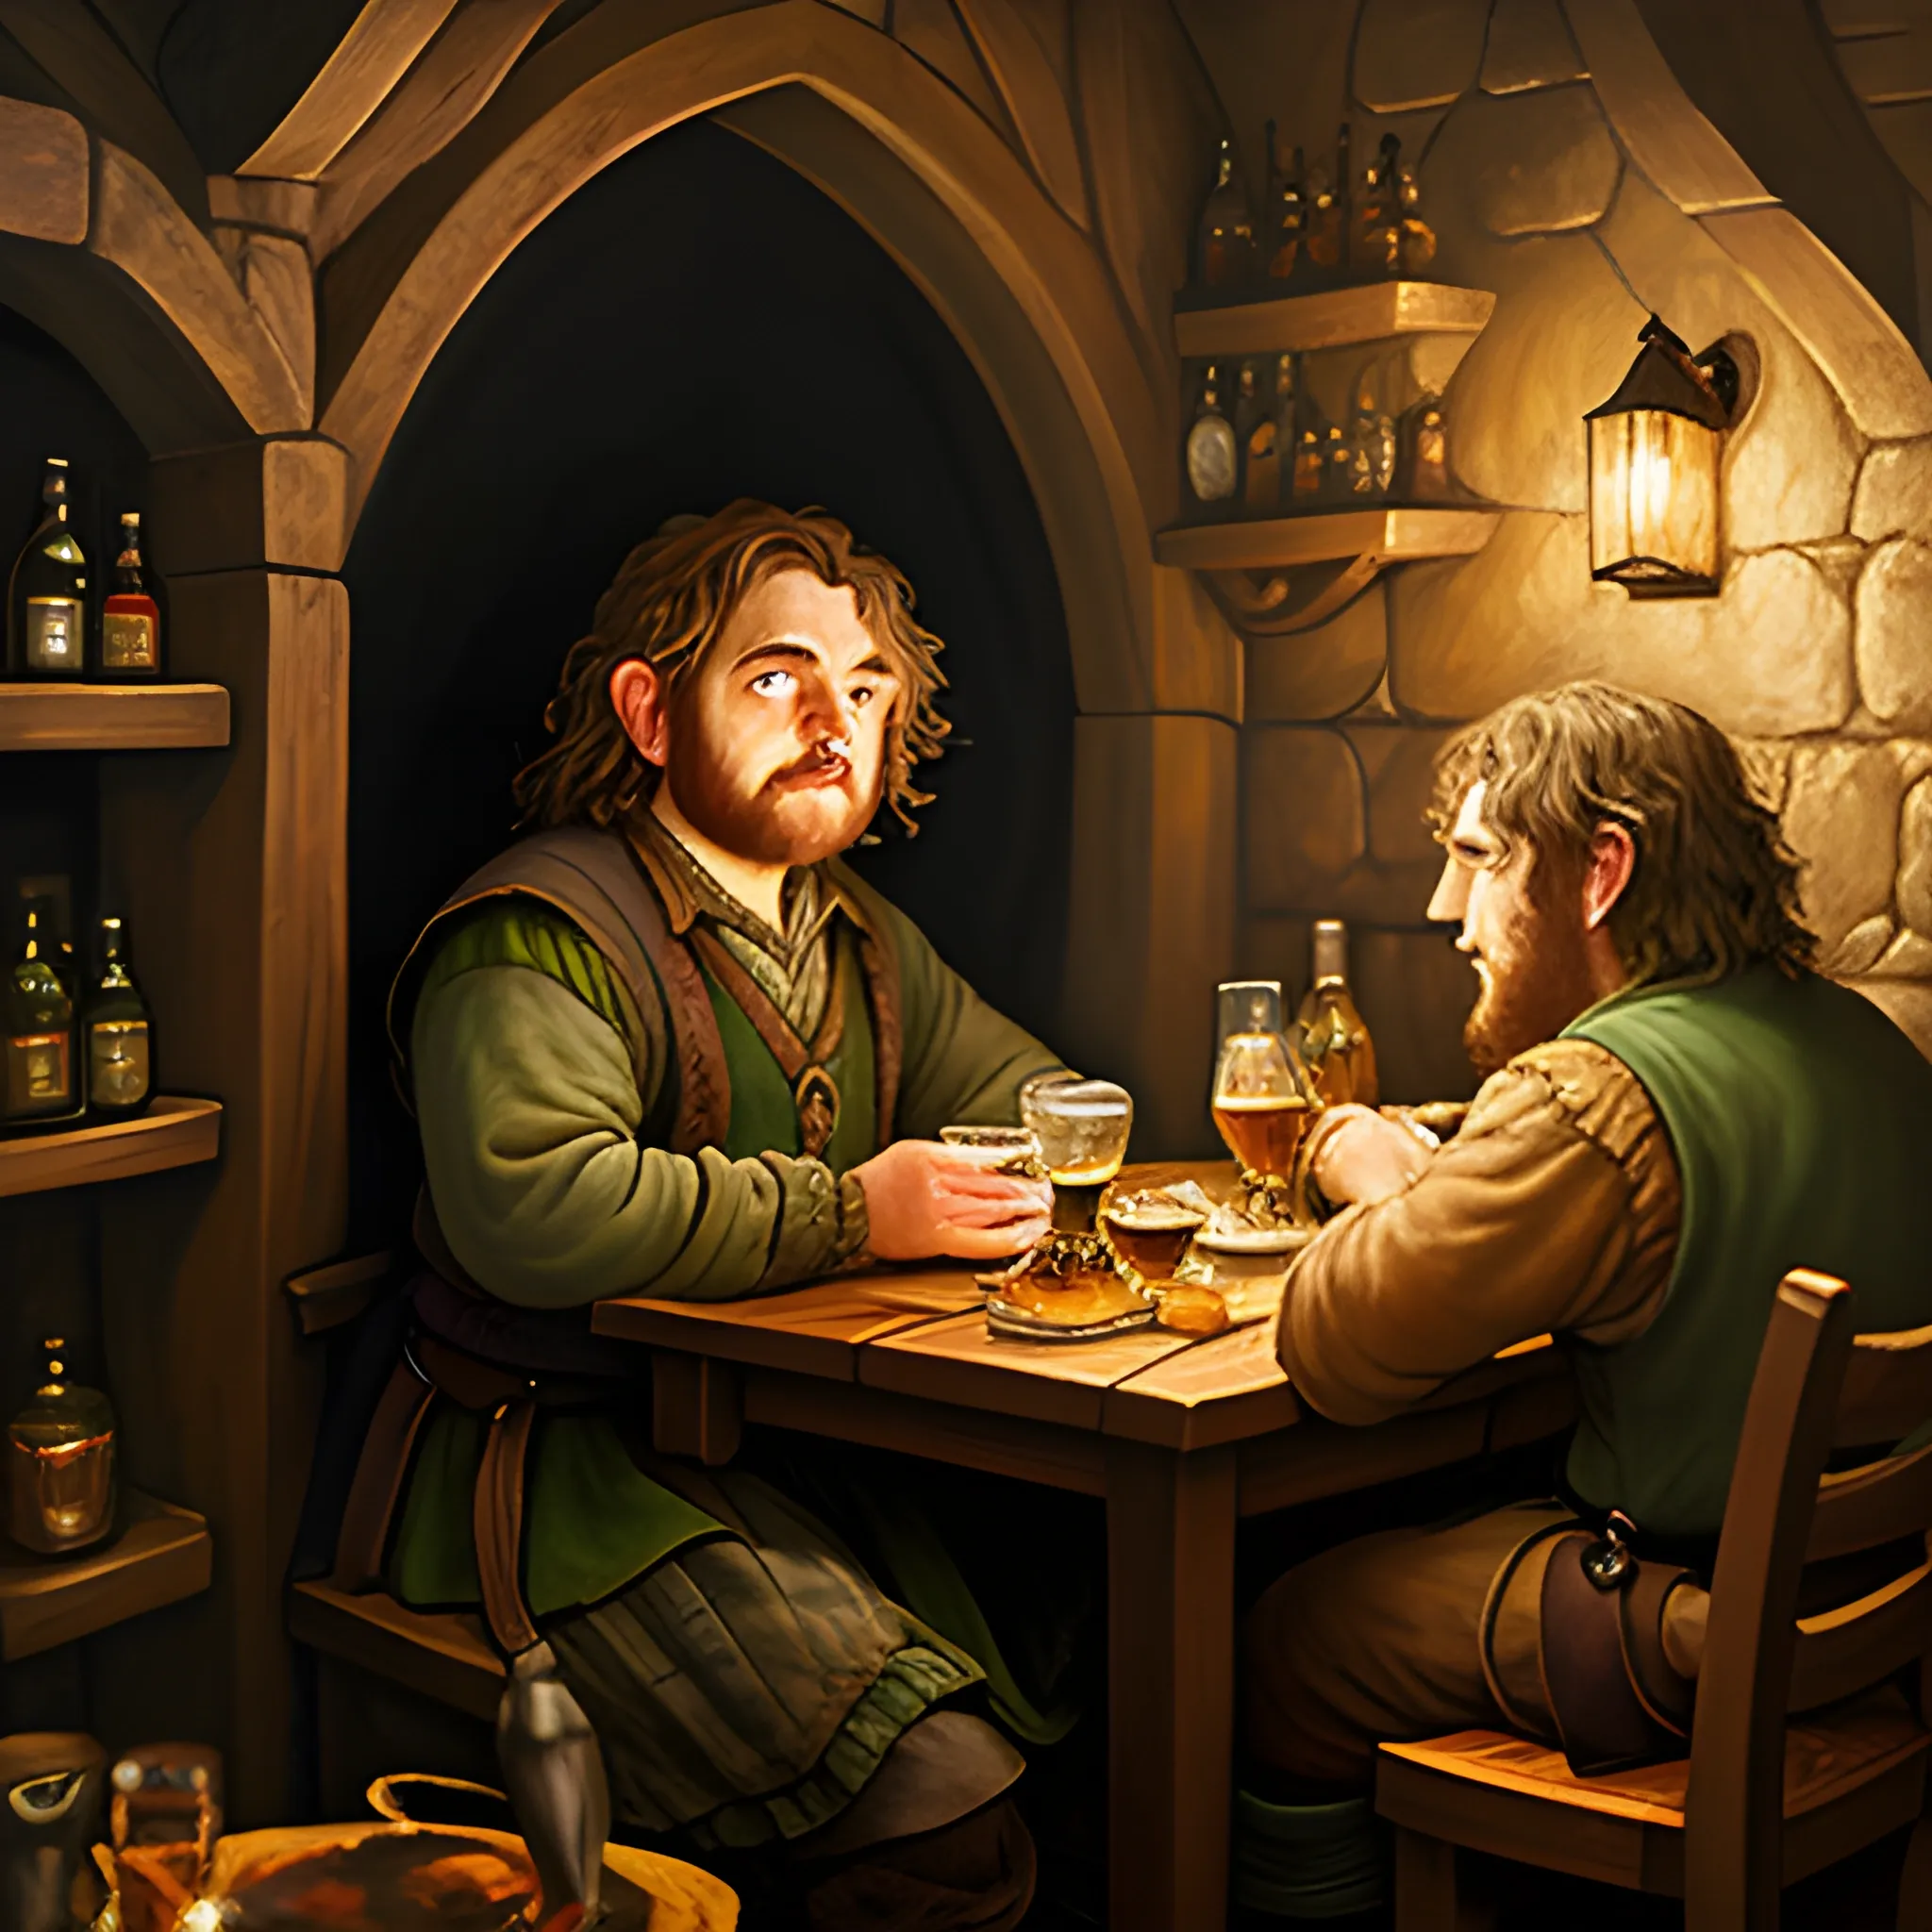 drunken hobbit in the tavern at night, middle earth, Oil Painting